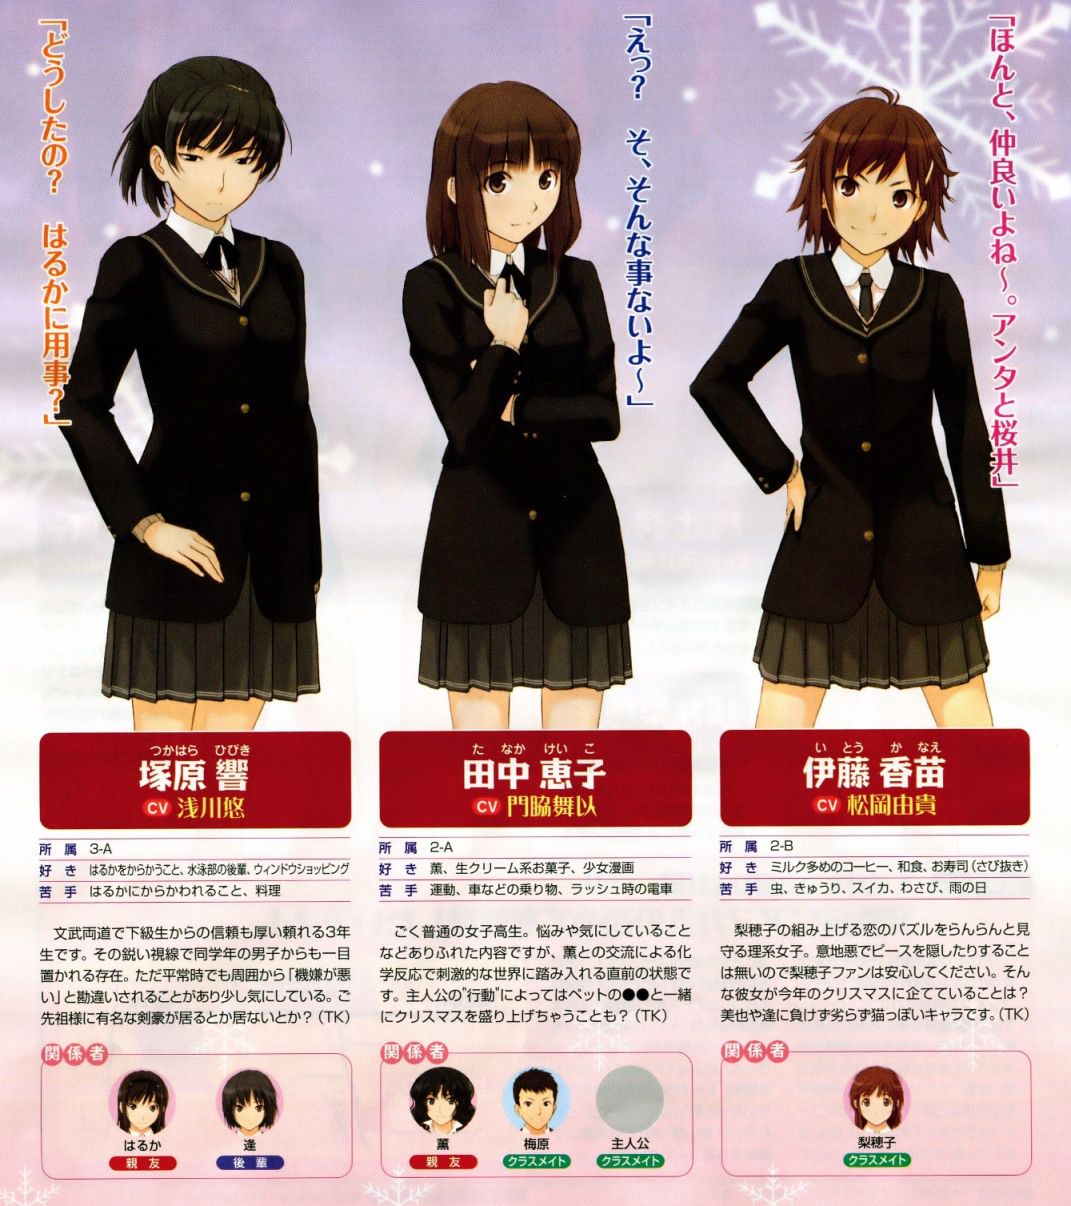 Cute characters "amagami" transcendence erotic illustrations images of the wwwwwww 52